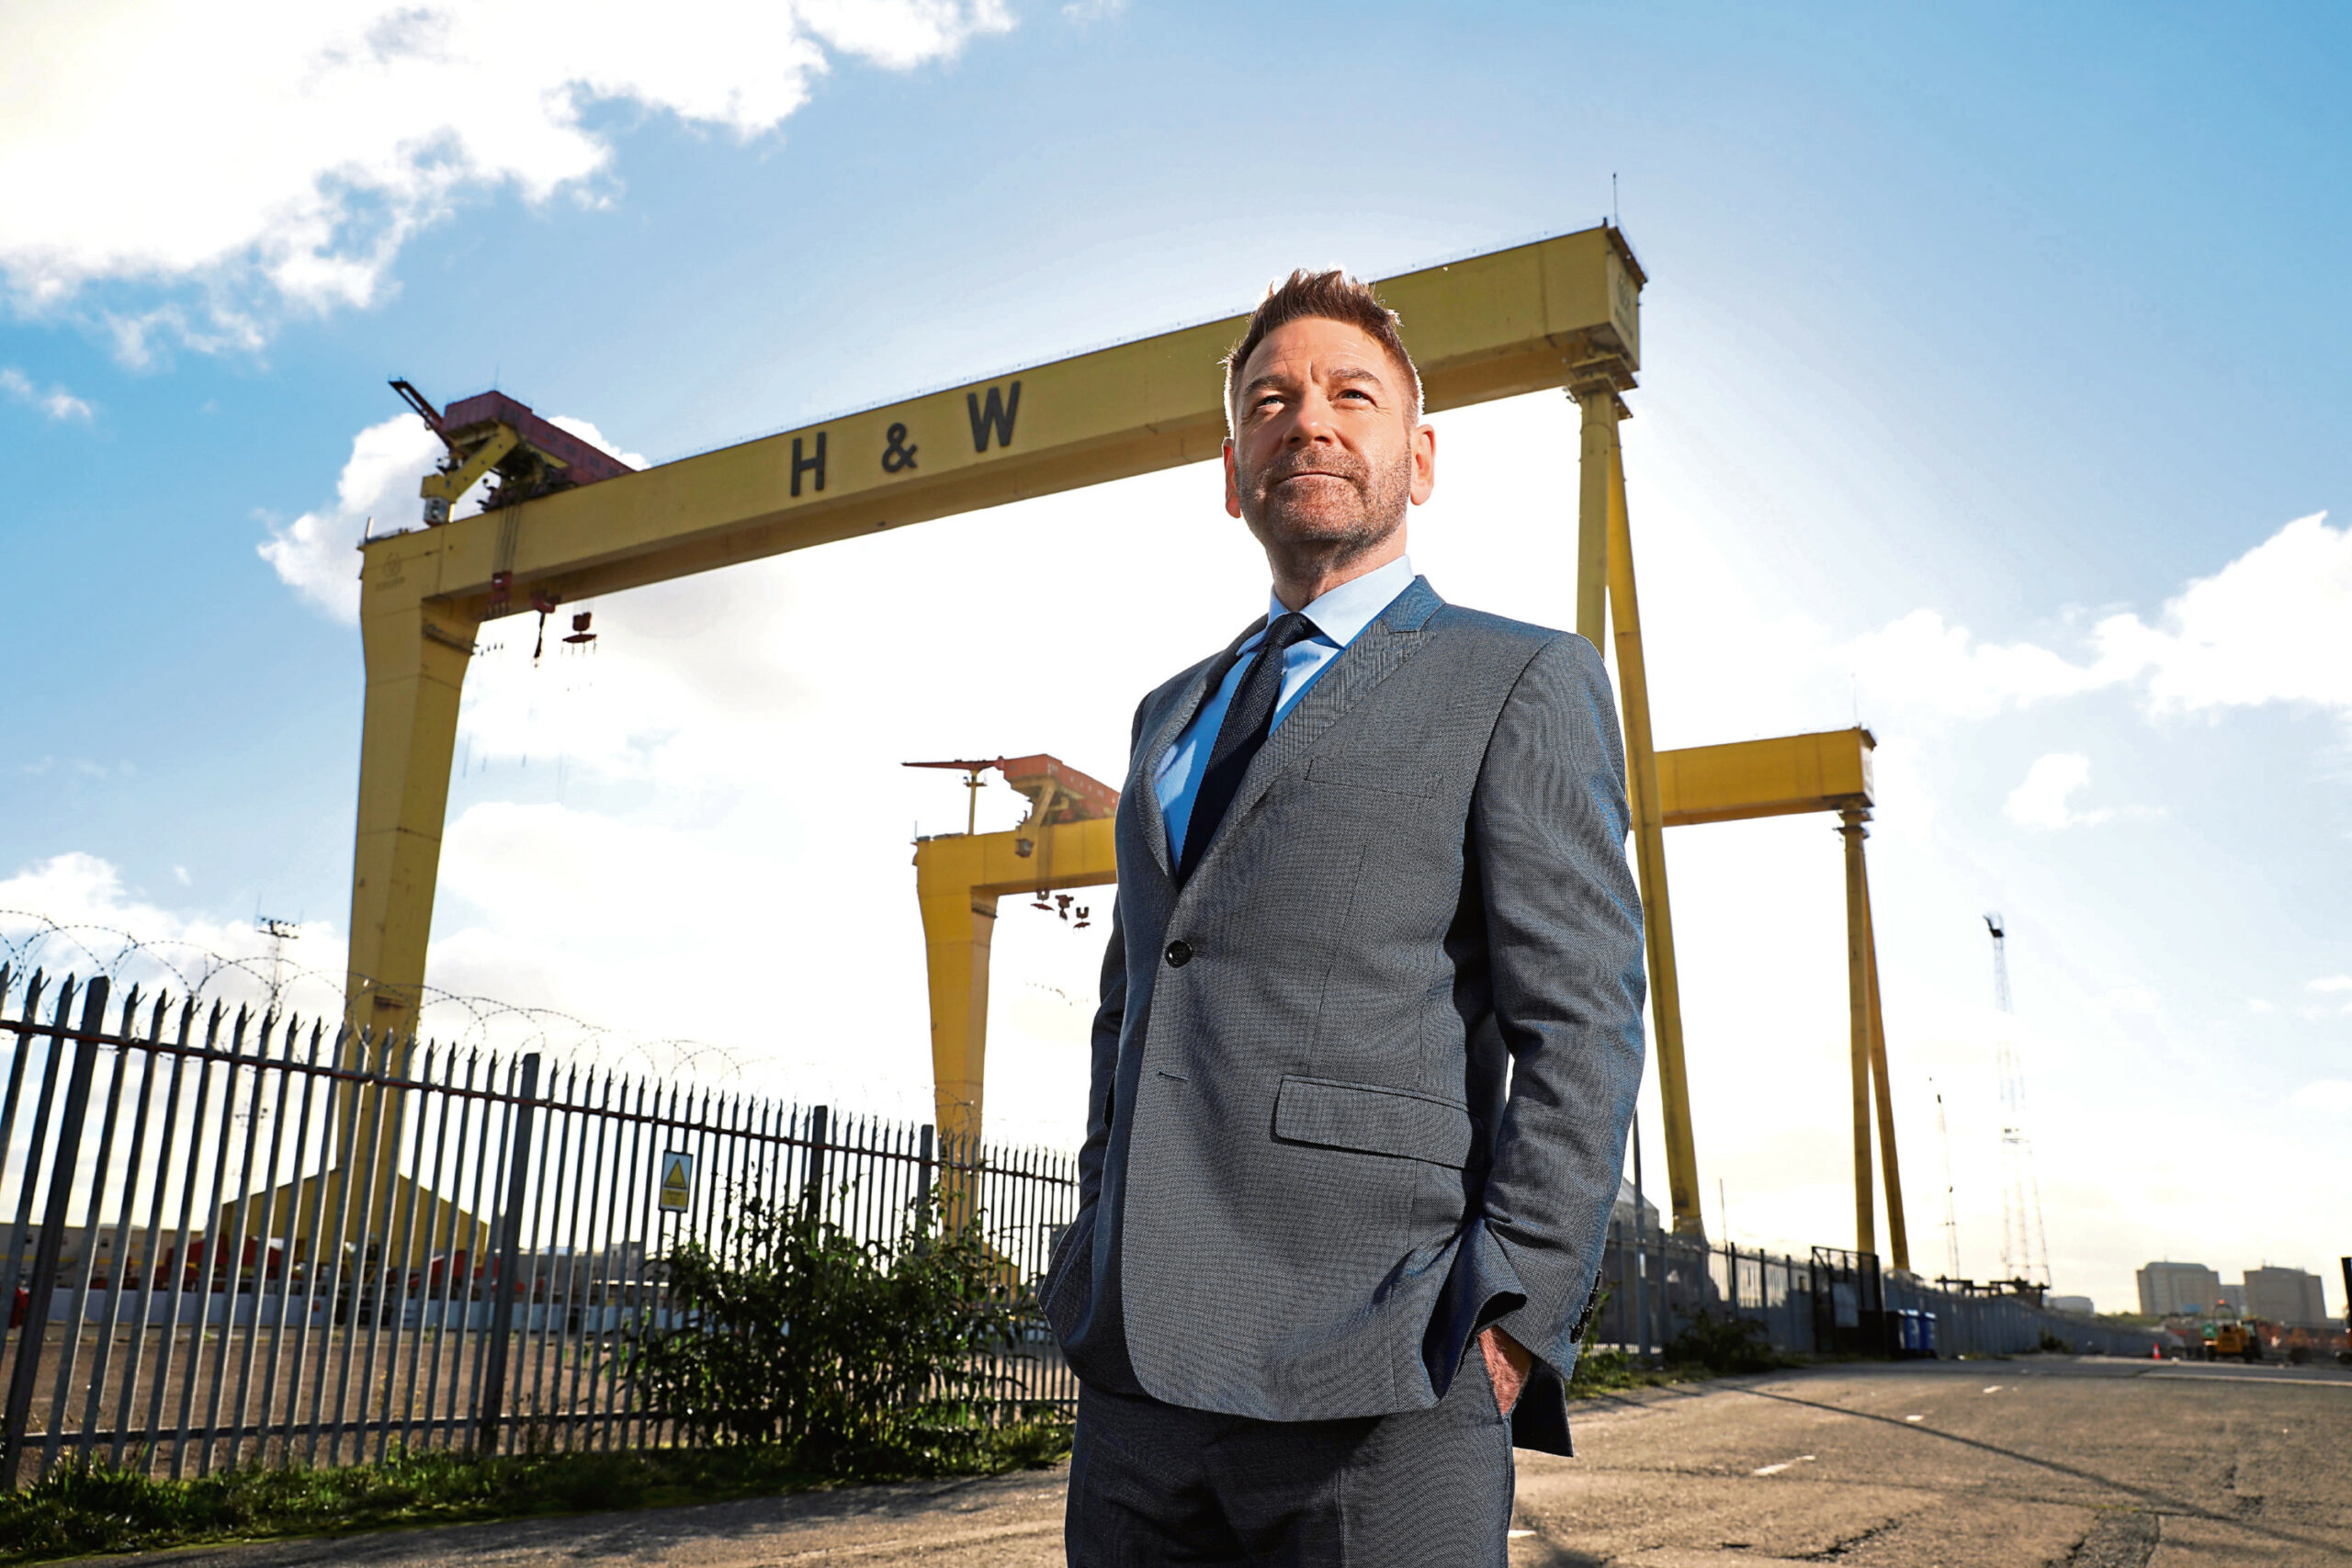 Kenneth Branagh at Northern Ireland's iconic Harland & Wolff cranes 'Samson and Goliath' ahead of the Irish premiere of his critically acclaimed new film BELFAST.